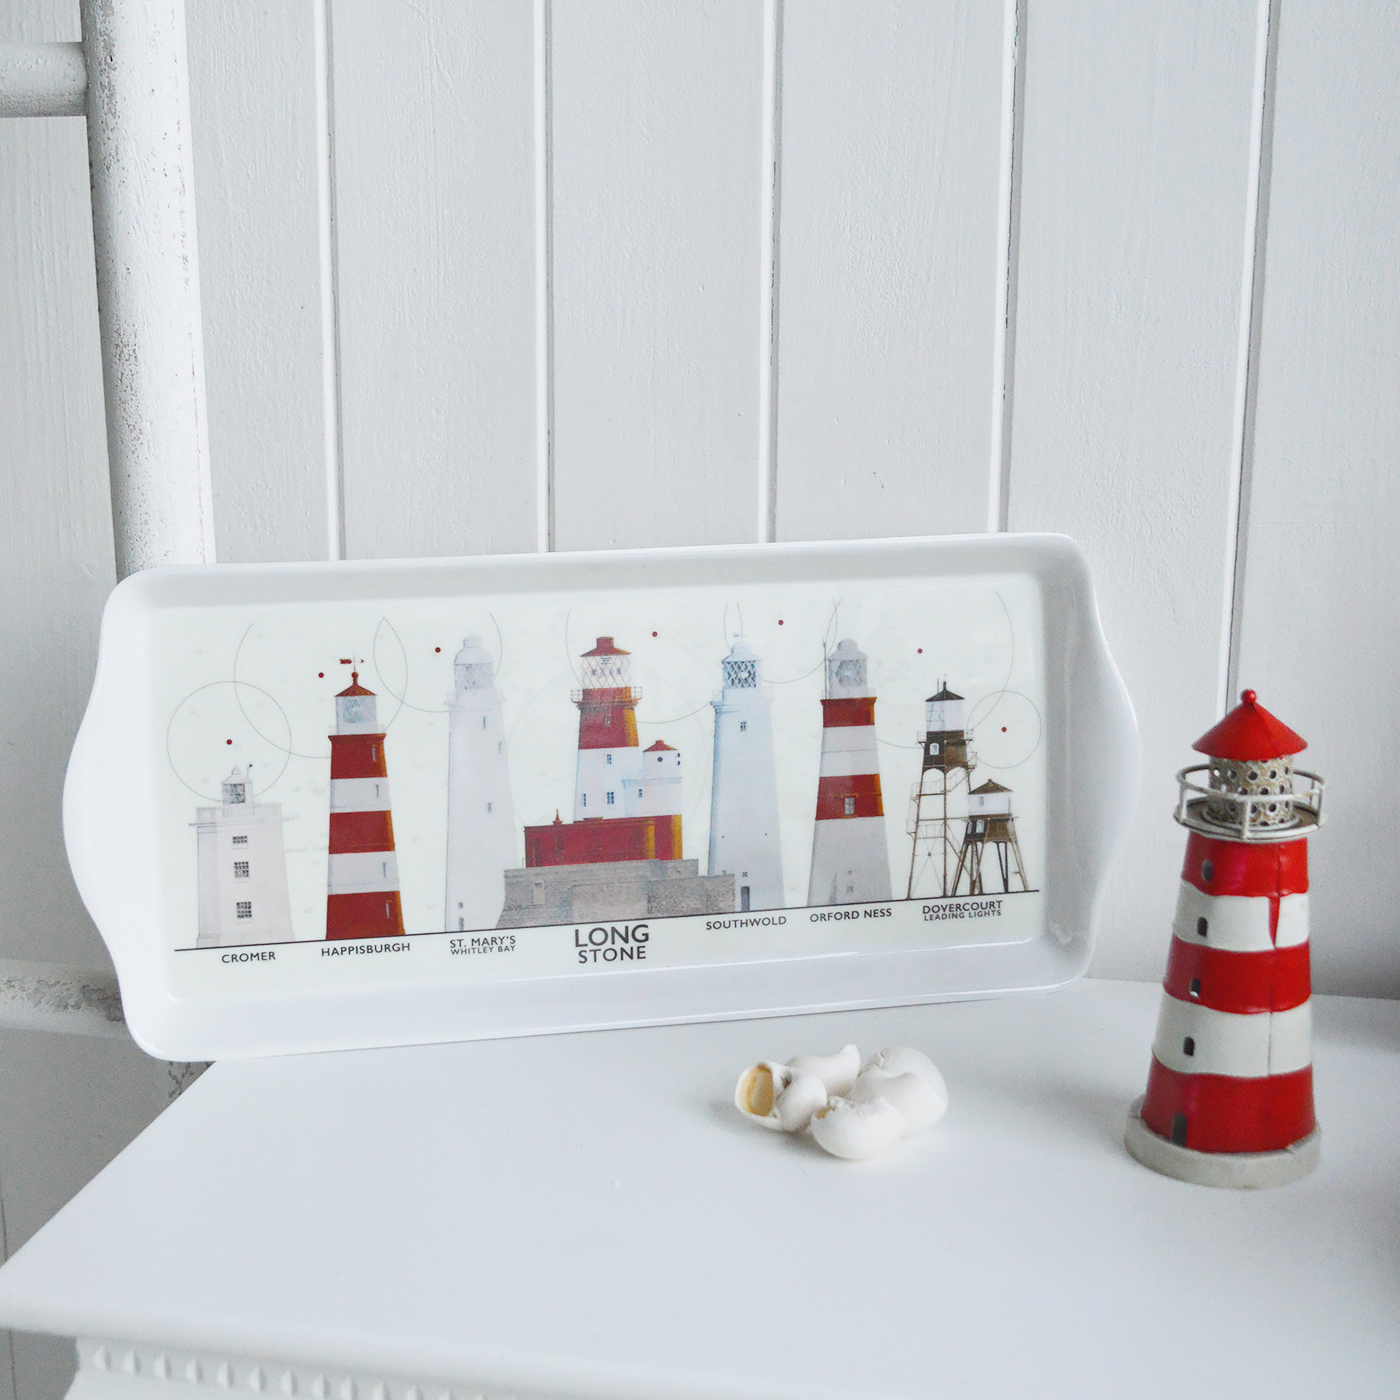 Lighthouse Sandwich Tray - Table Centre Piece for New England Style interiors for coastal, country and city home interiors from The White Lighthouse. autical Coastal Home Decor and Accessories